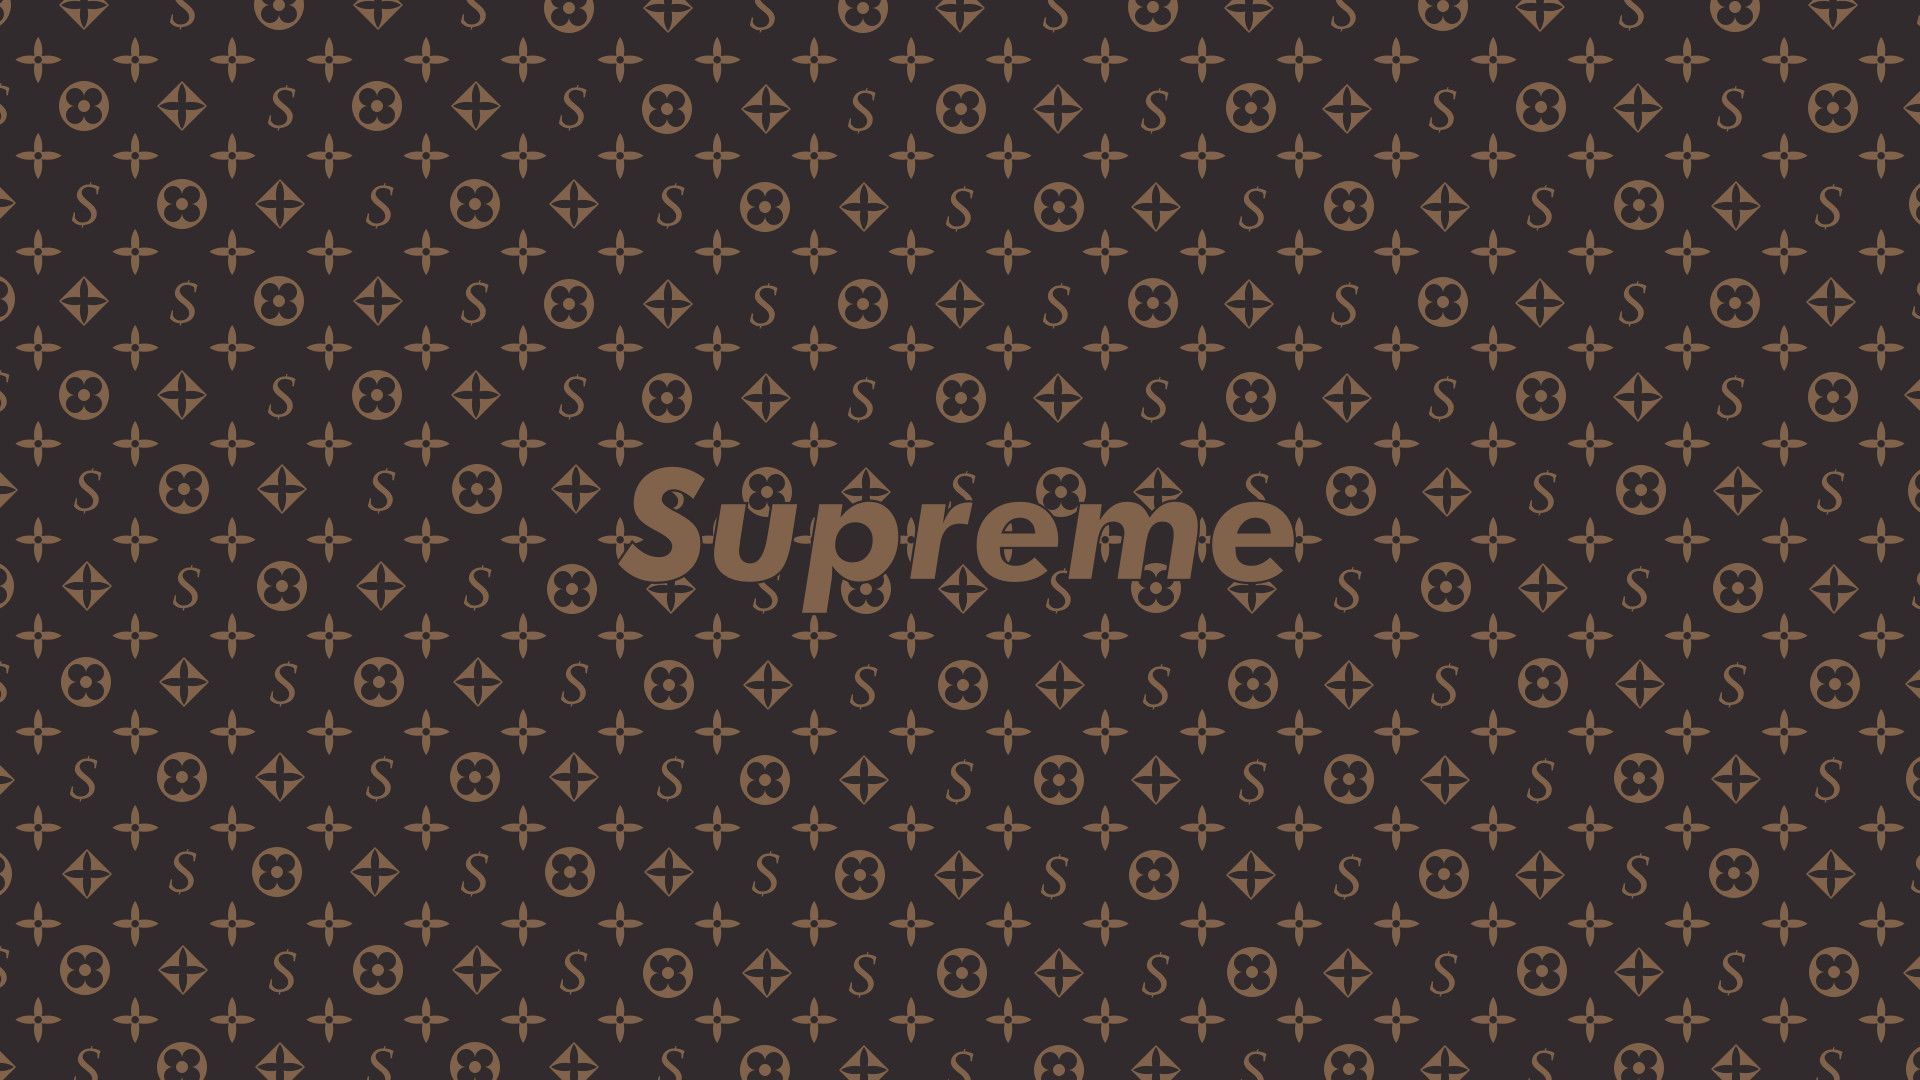 Louis Vuitton And Gucci Wallpapers